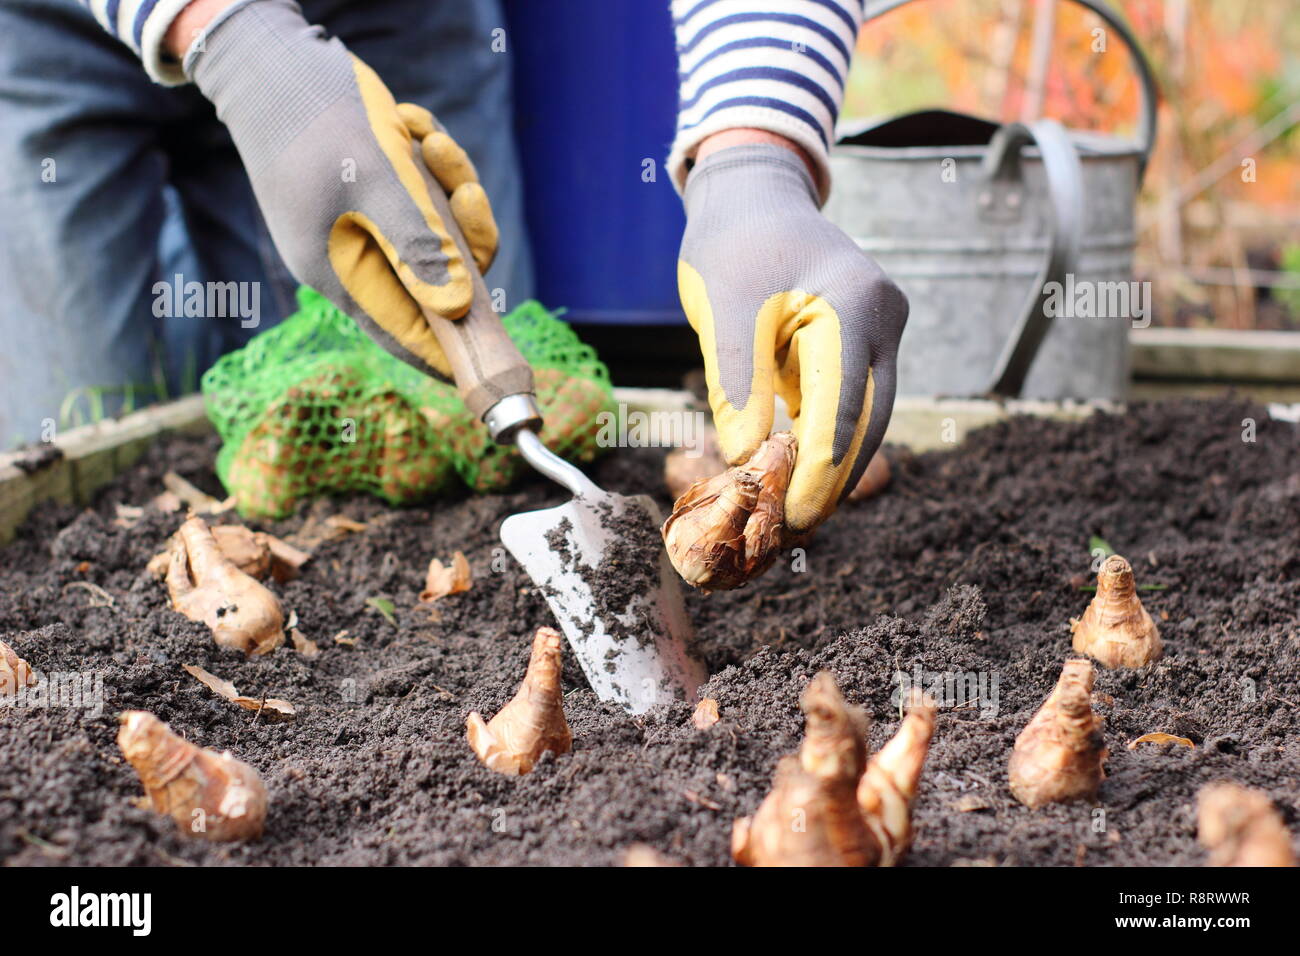 Narcissus. Planting daffodil bulbs with a hand trowel for spring, November, UK Stock Photo